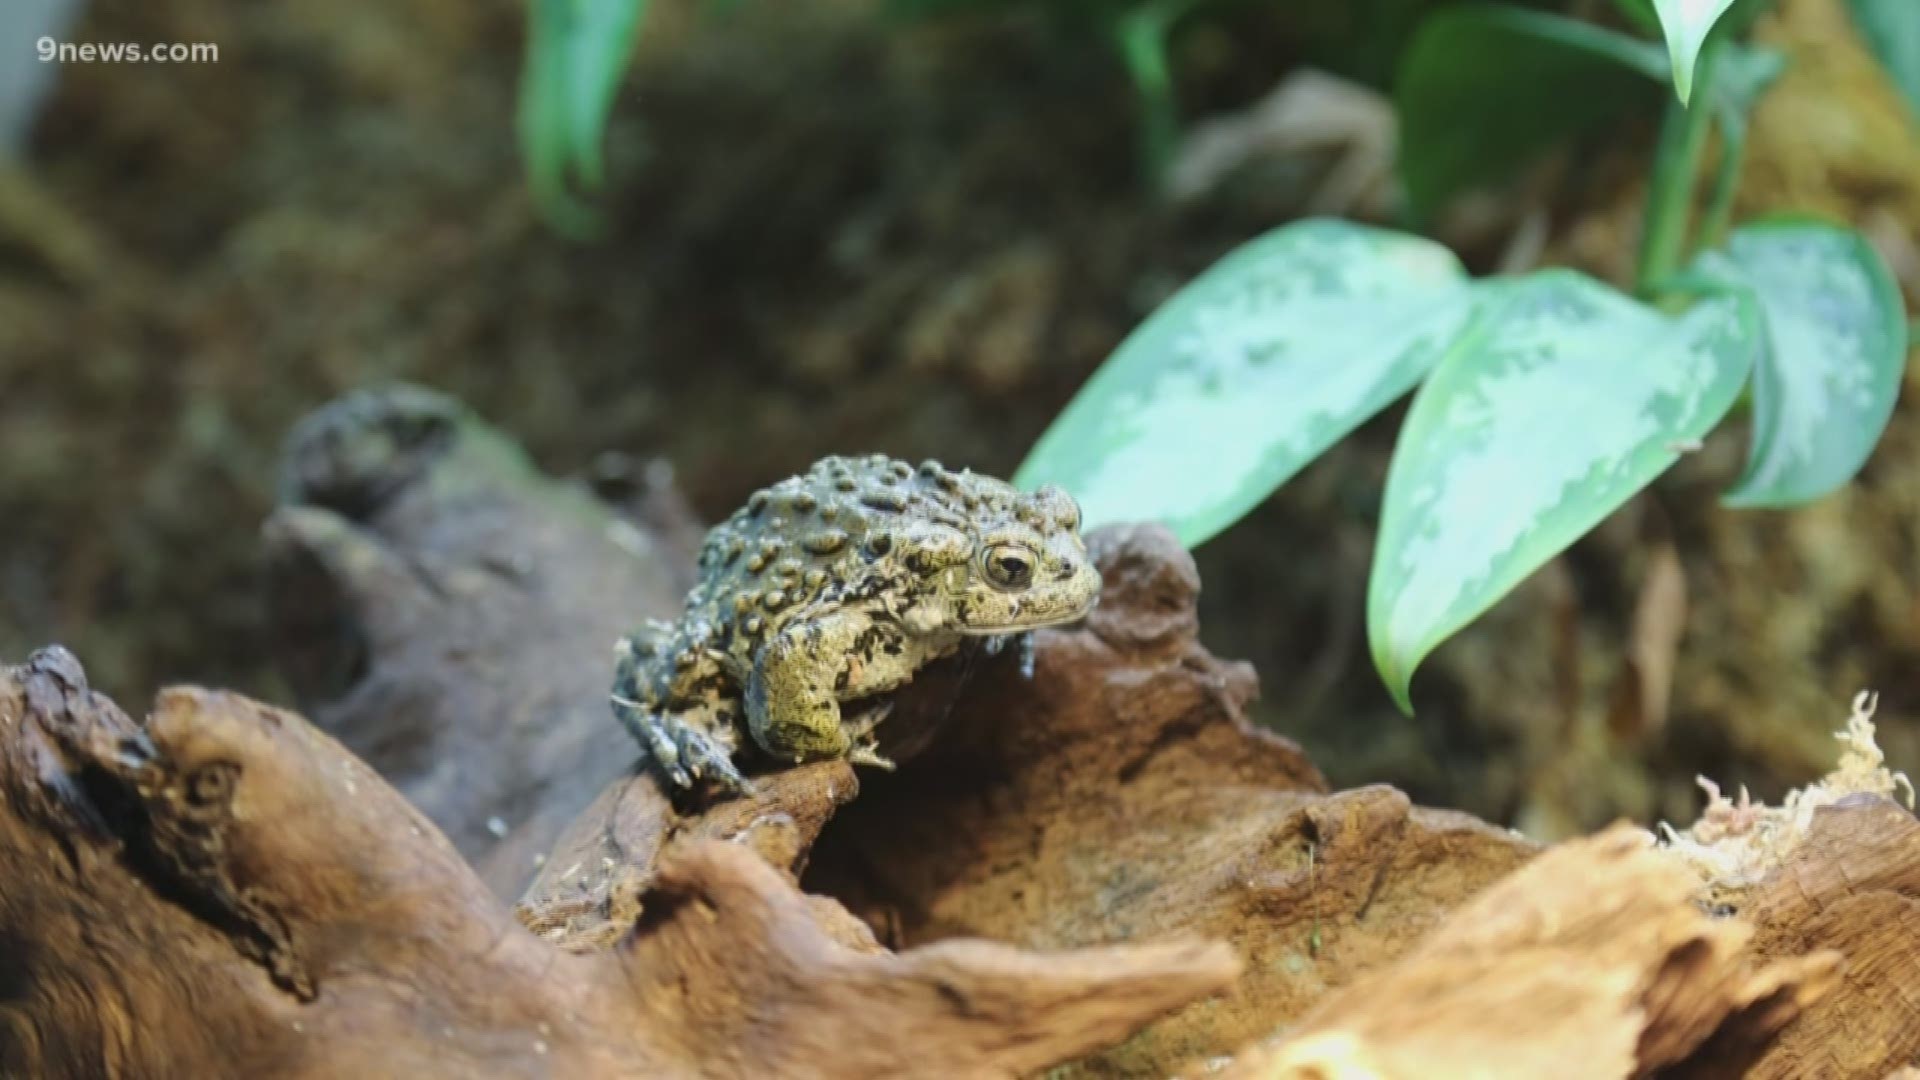 More than 50 percent of frog, toad, salamander and other amphibian species are at risk of extinction within the next 50 to 100 years due to habitat loss, climate change, pollution and disease.